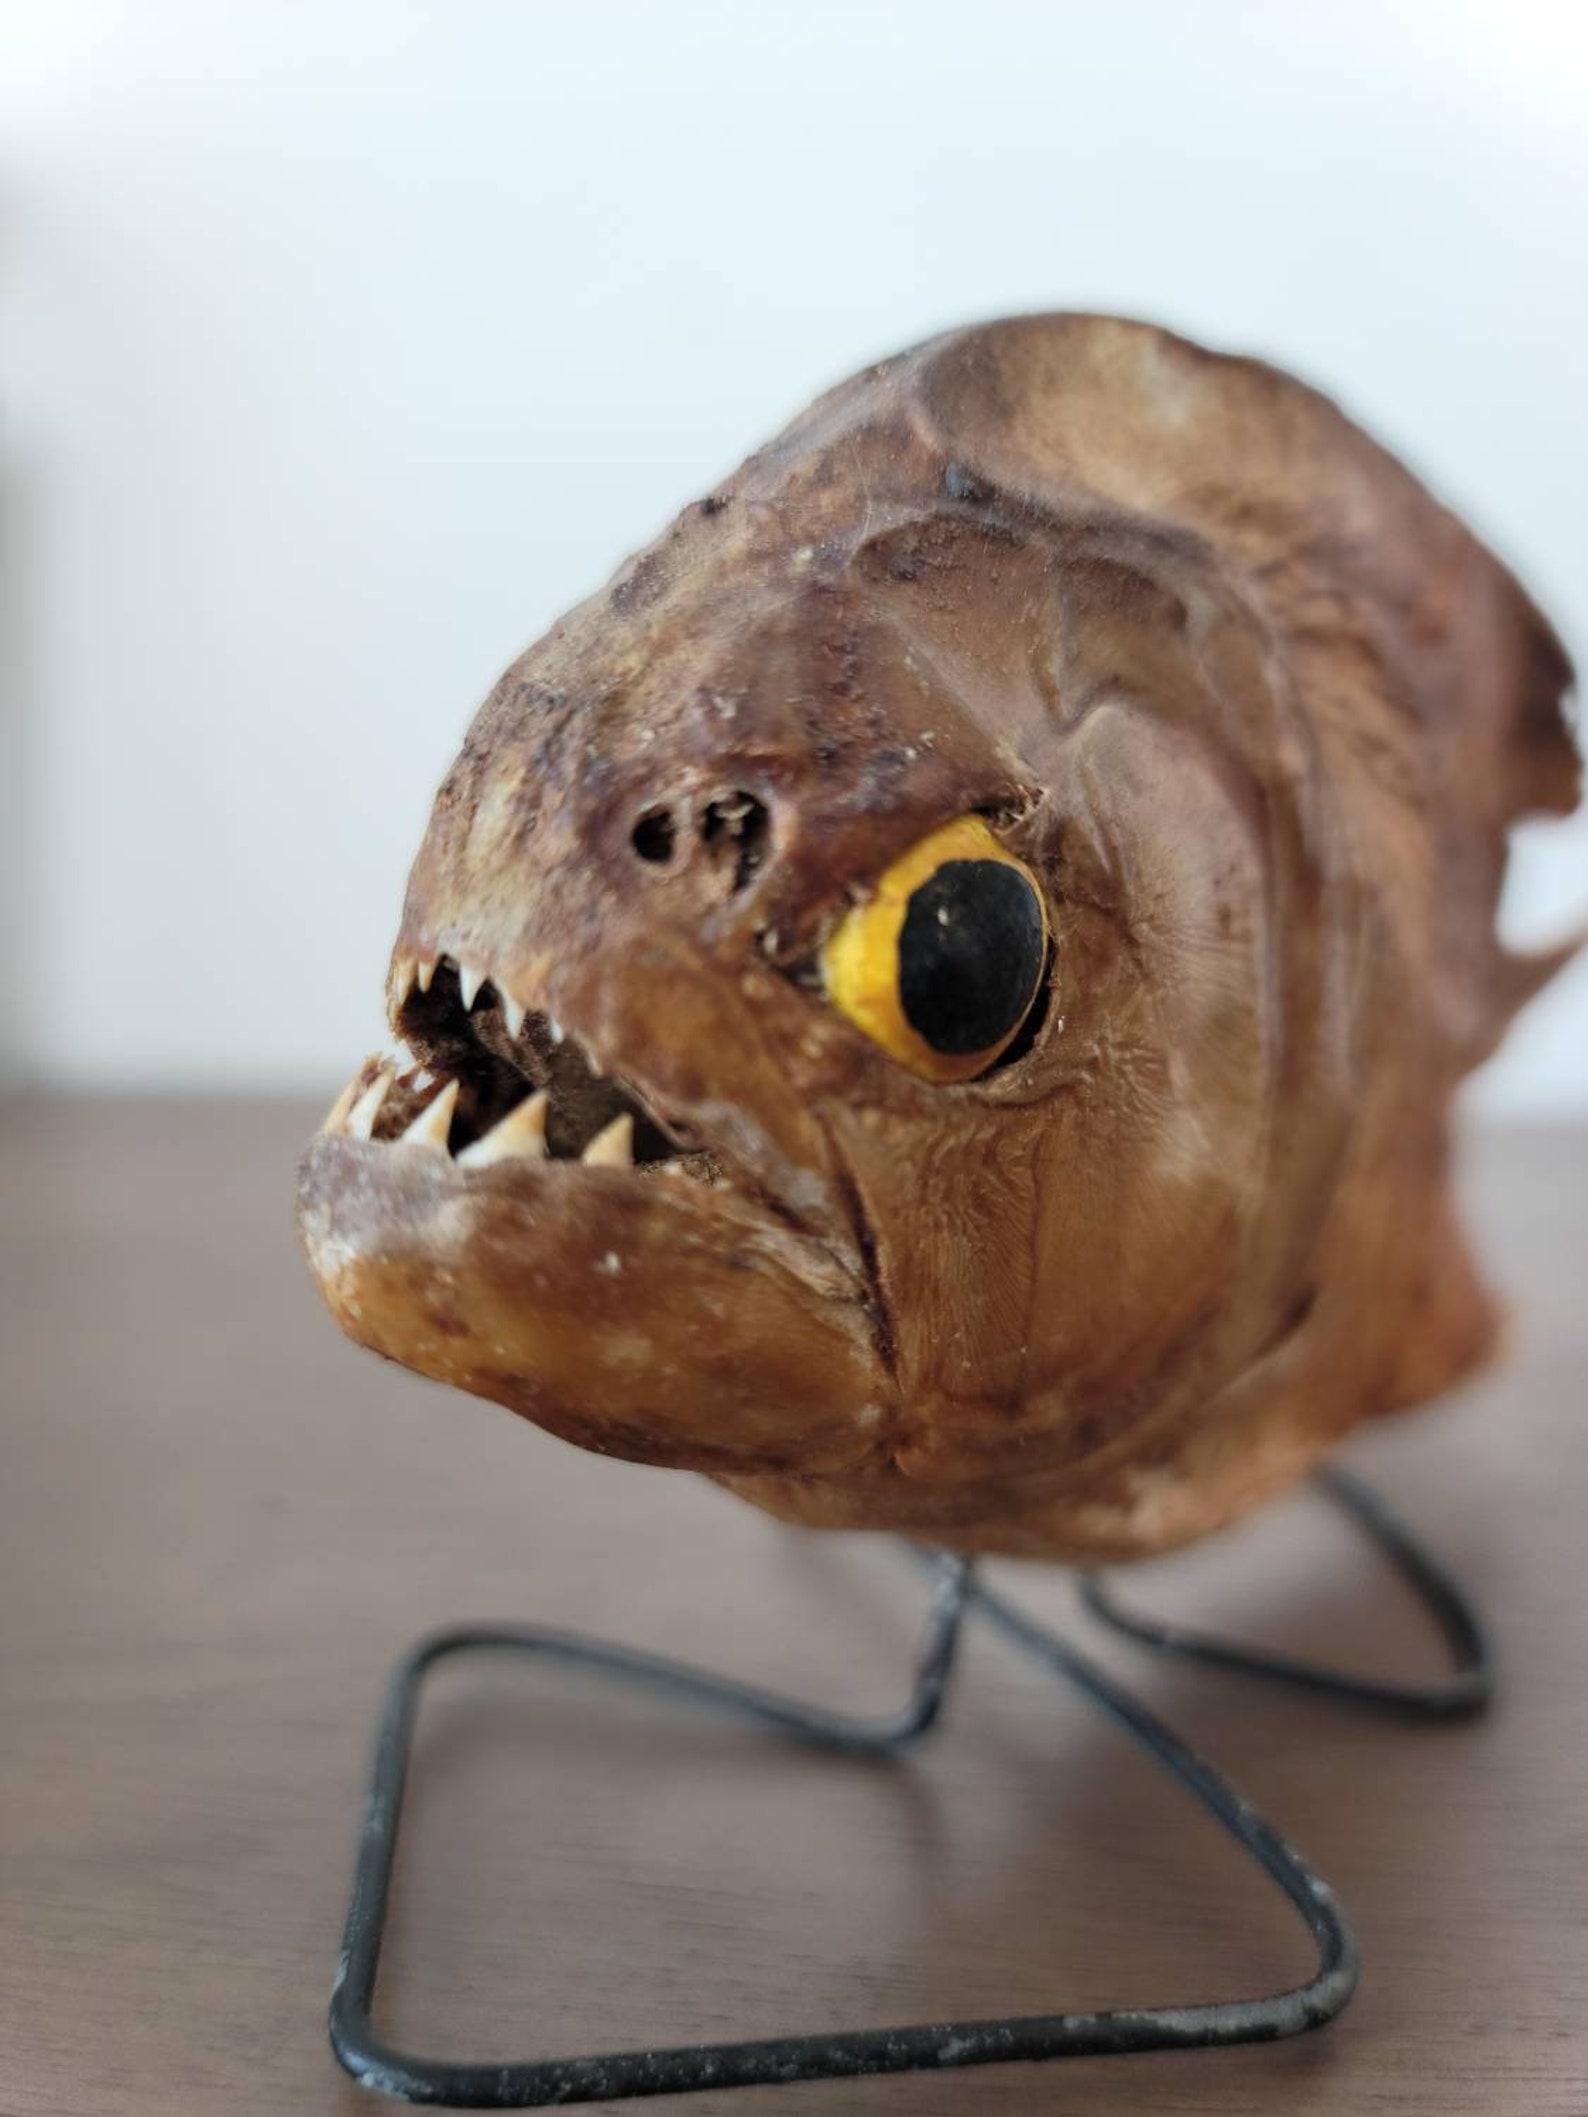 A rare and unusual antique natural taxidermy specimen of a Piranha. Amazon River Basin, South America, belonging to the Serrasalmidae family, Characiformes order, most likely a Red Bellied Piranha - Pygocentrus Nattereri. 

This exotic specimen is